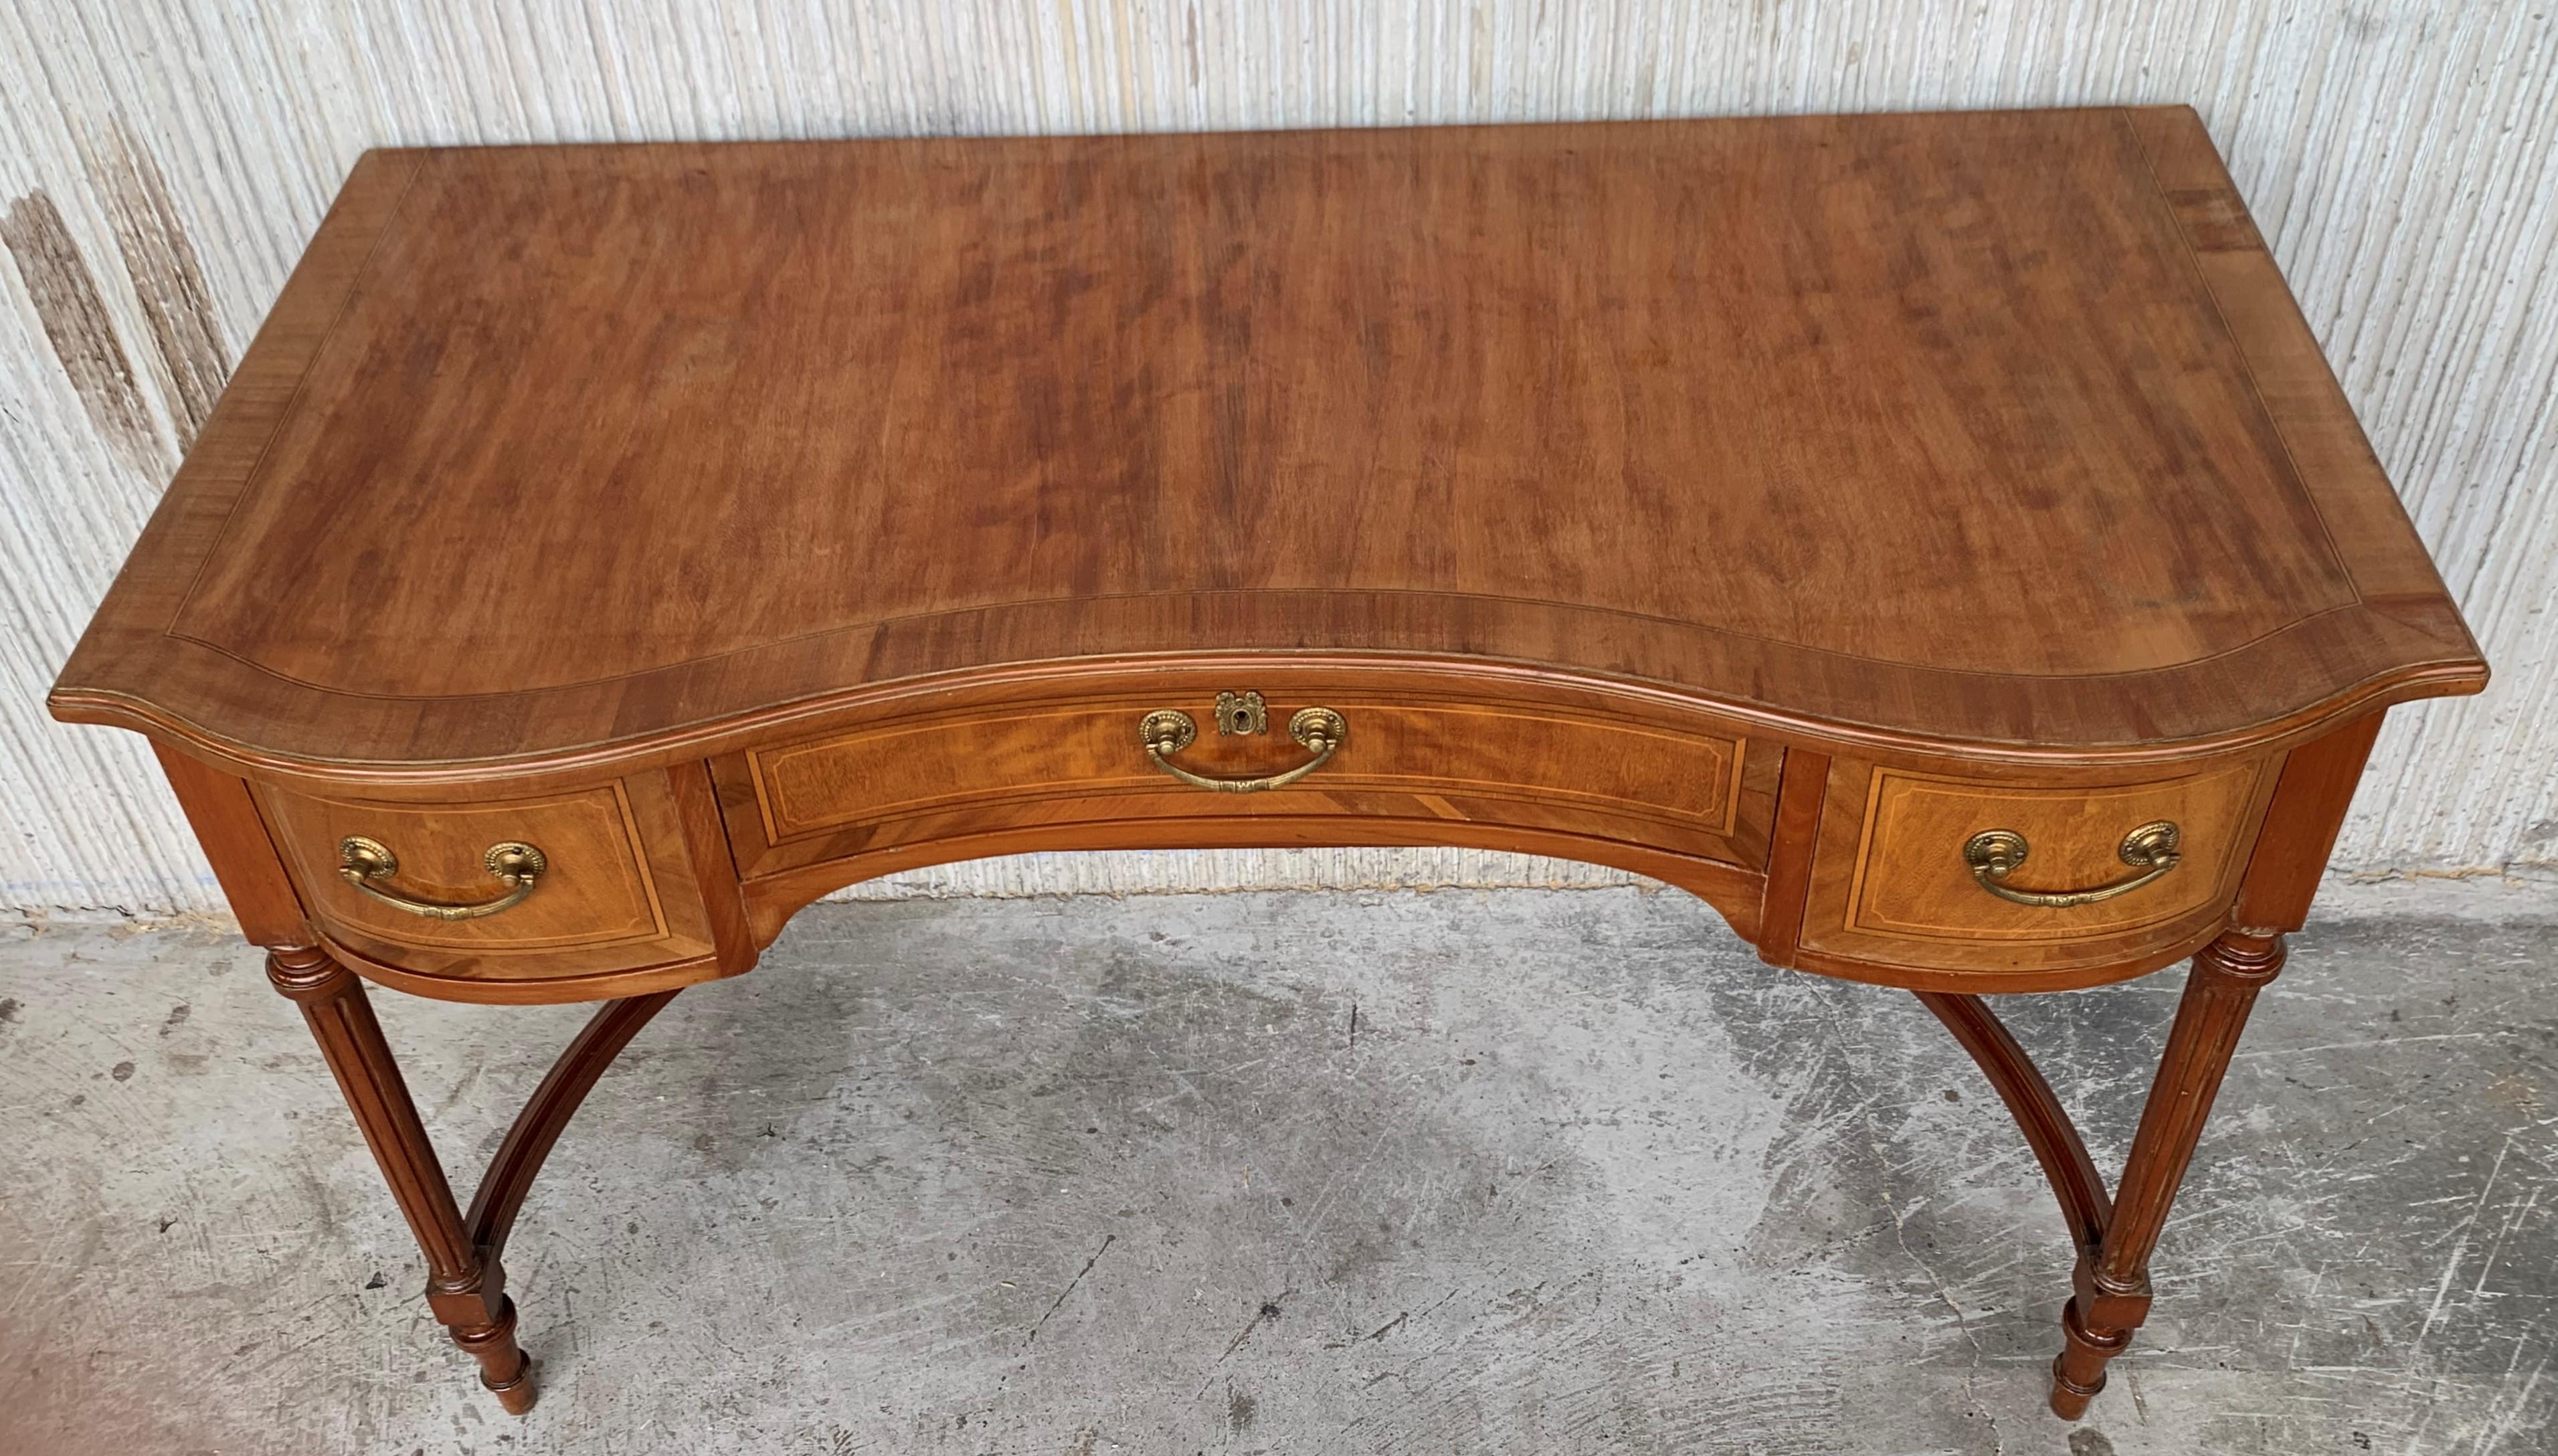 Bronze 20th Century French Louis XV Style Carved Cherry Desk with Three Drawers